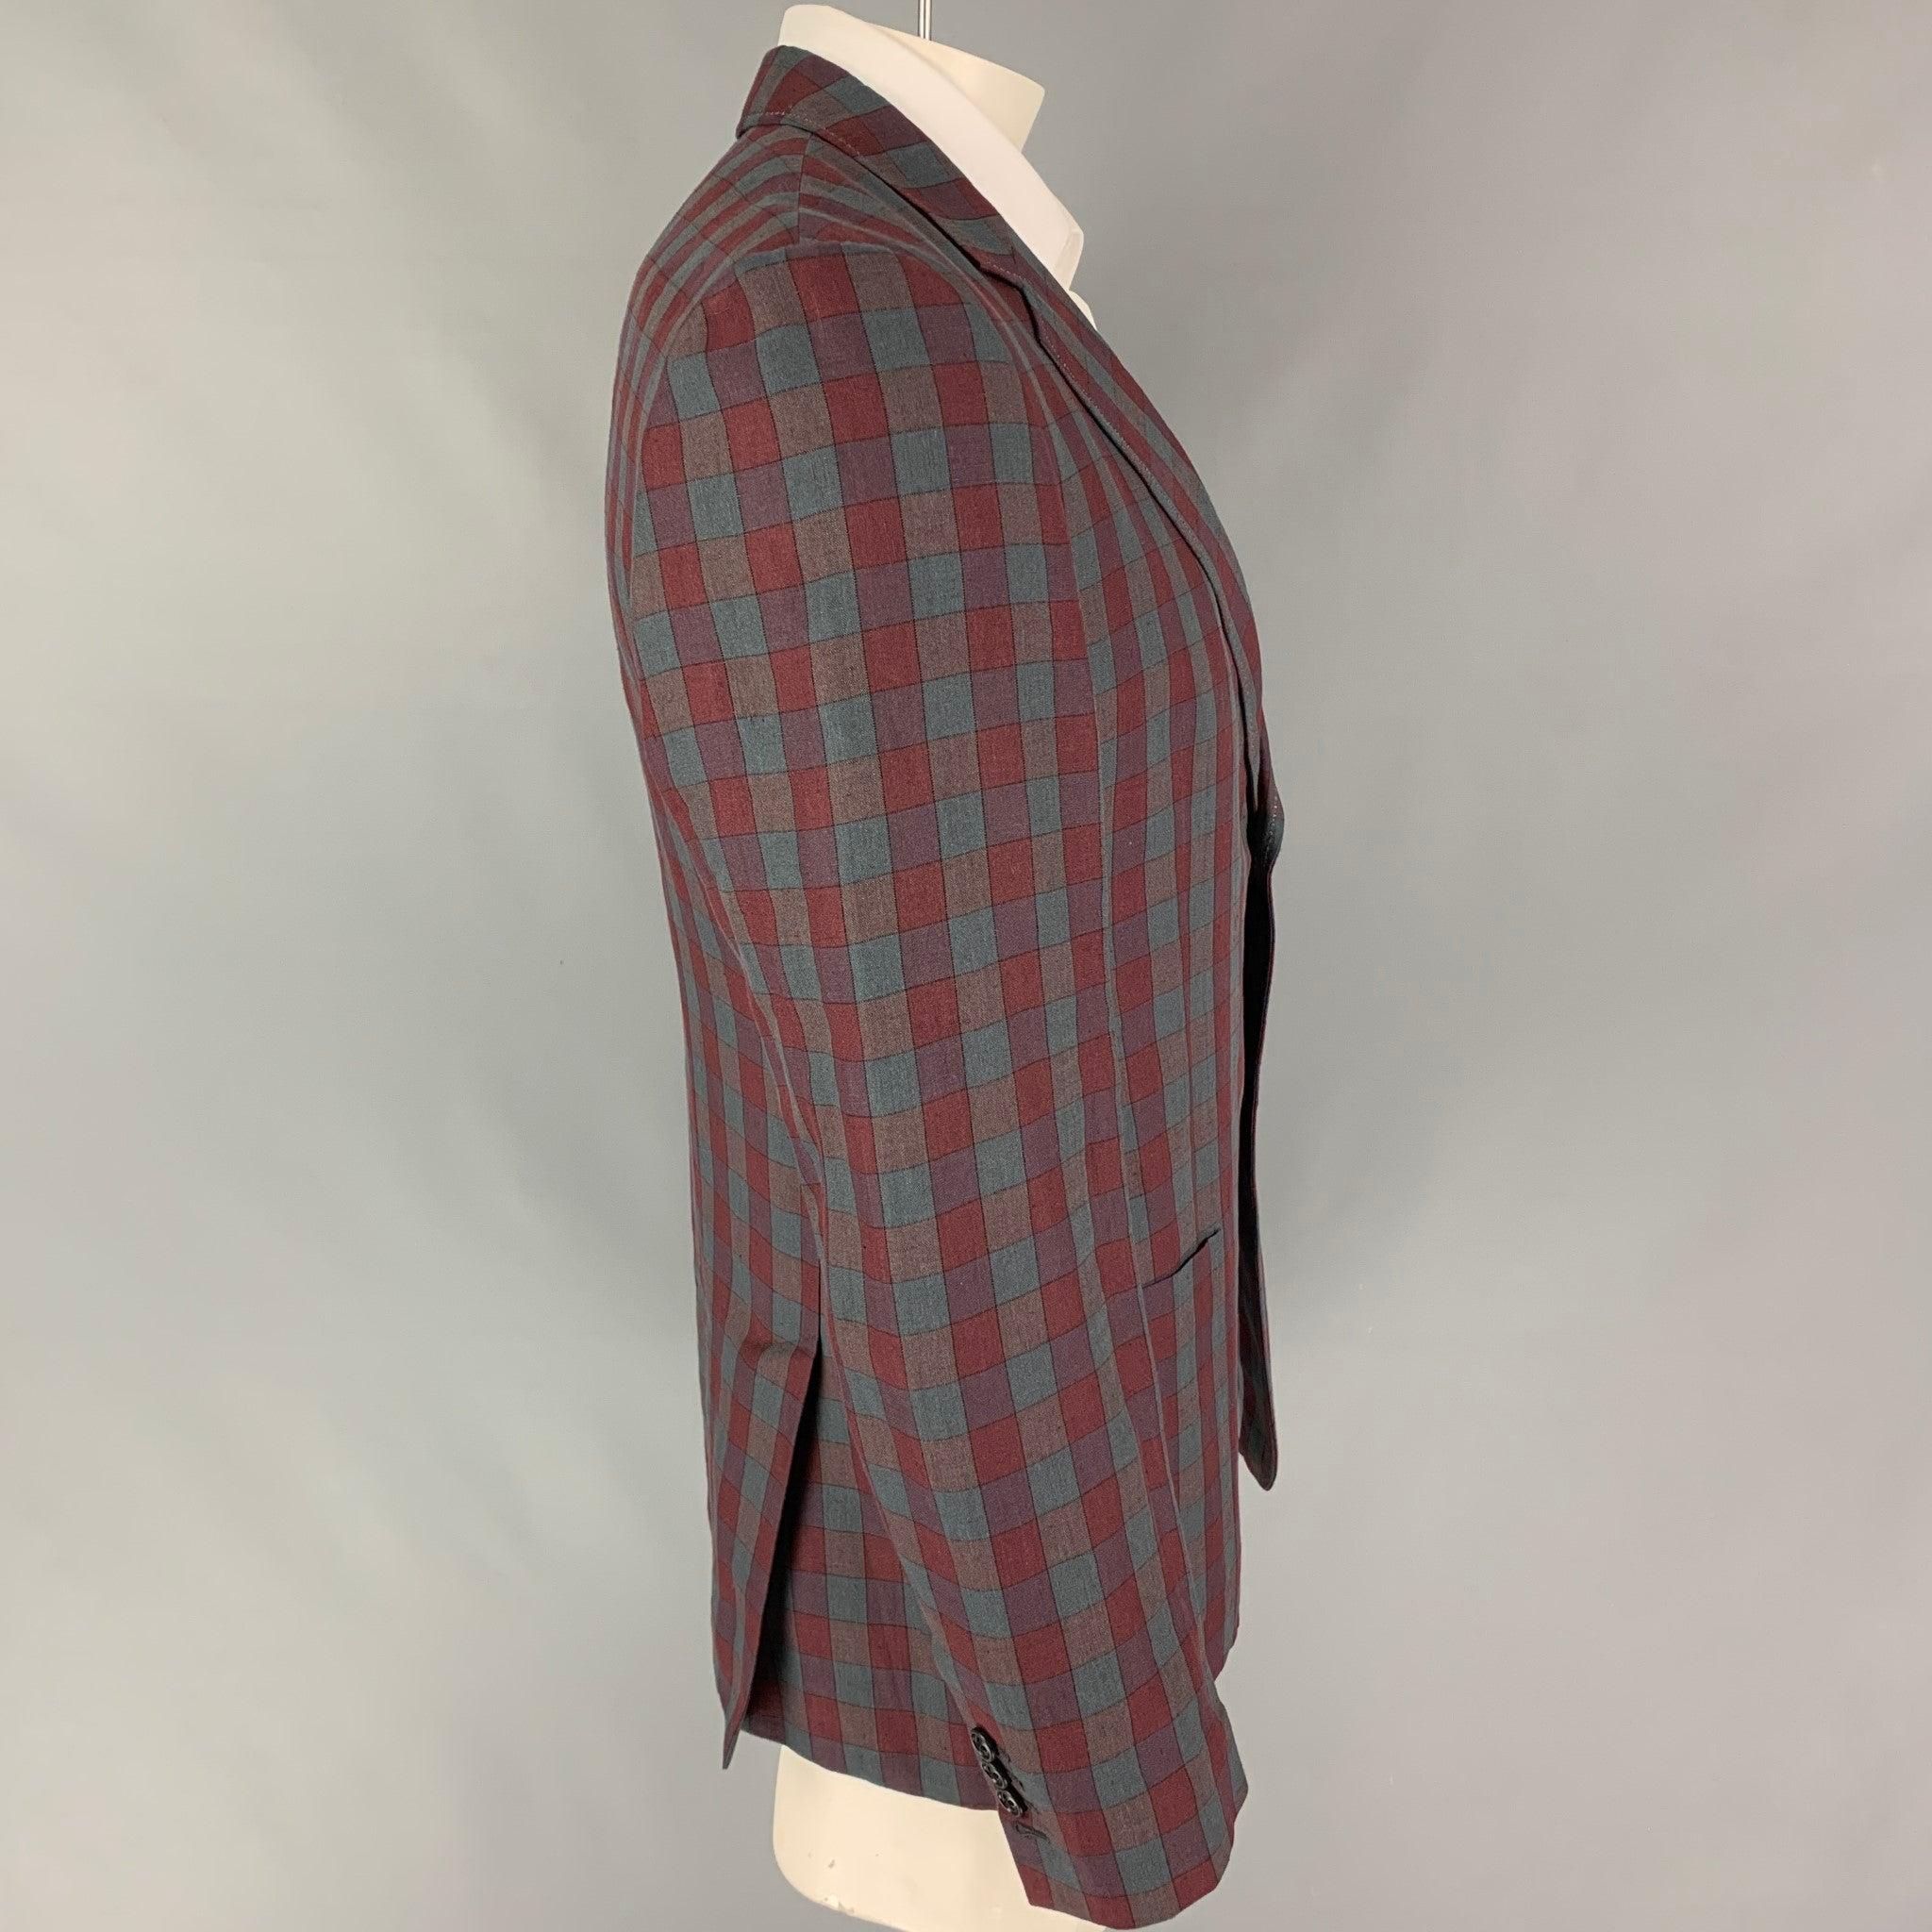 MARC JACOBS sport coat comes in a burgundy & grey plaid linen with a half liner featuring a notch lapel, patch pockets, double back vent, and a double button closure. Made in Italy.
Very Good
Pre-Owned Condition. 

Marked:   52 

Measurements: 
